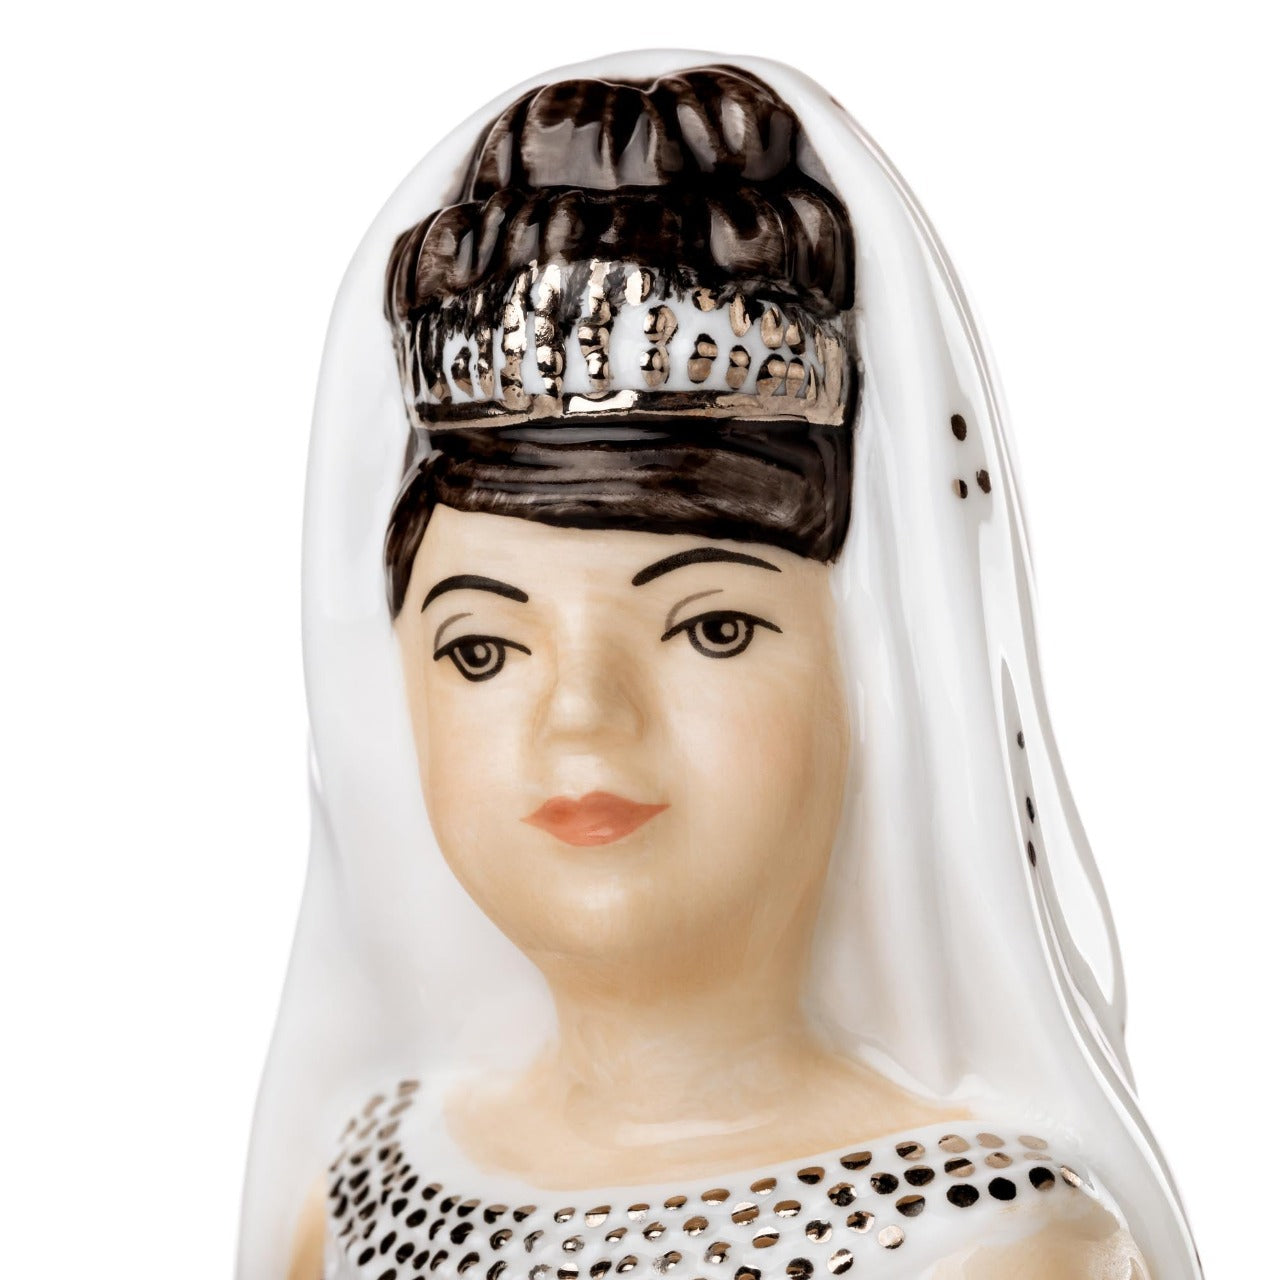 English Ladies Mini Gypsy Affection Brunette  Gypsy Affection is the latest edition to the range and comes in both blonde and brunette and also in mini-figures. This gorgeous figurine stands out from the crowd with stunning gold details throughout the dress and on her beautiful crown.